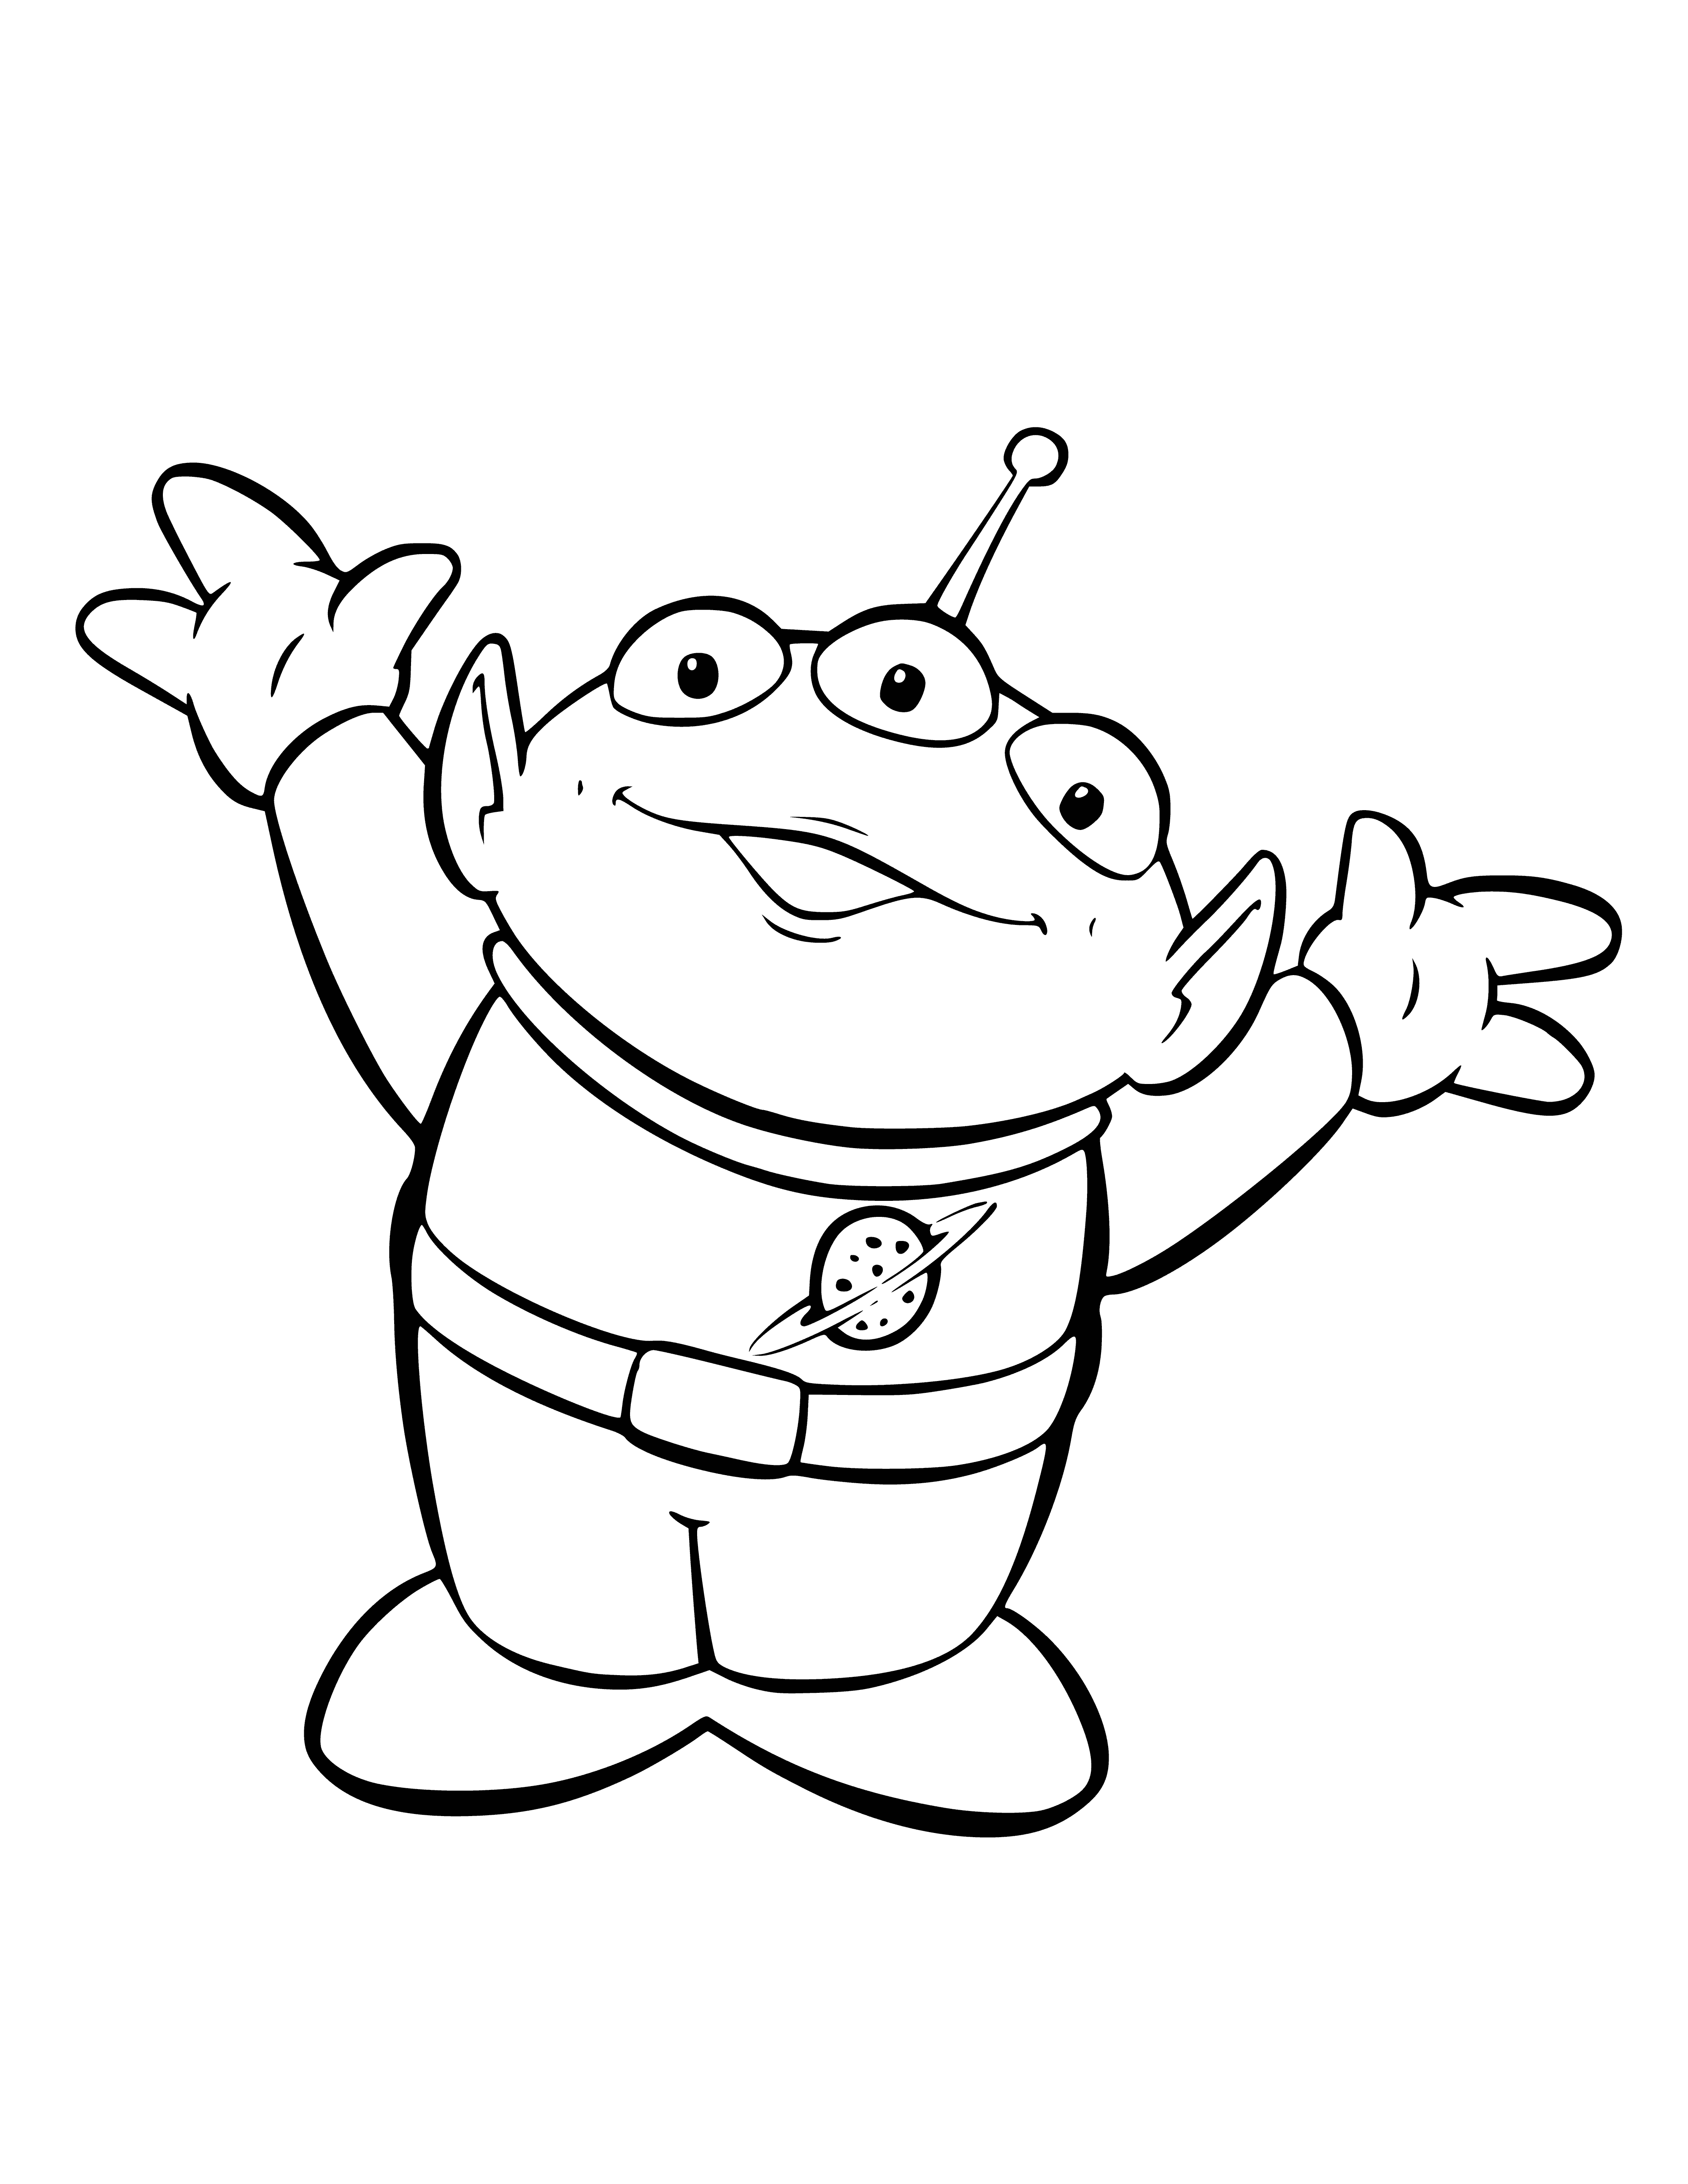 coloring page: A green three-eyed Alien toy with two arms/legs wearing a purple Spacesuit from Toy Story.